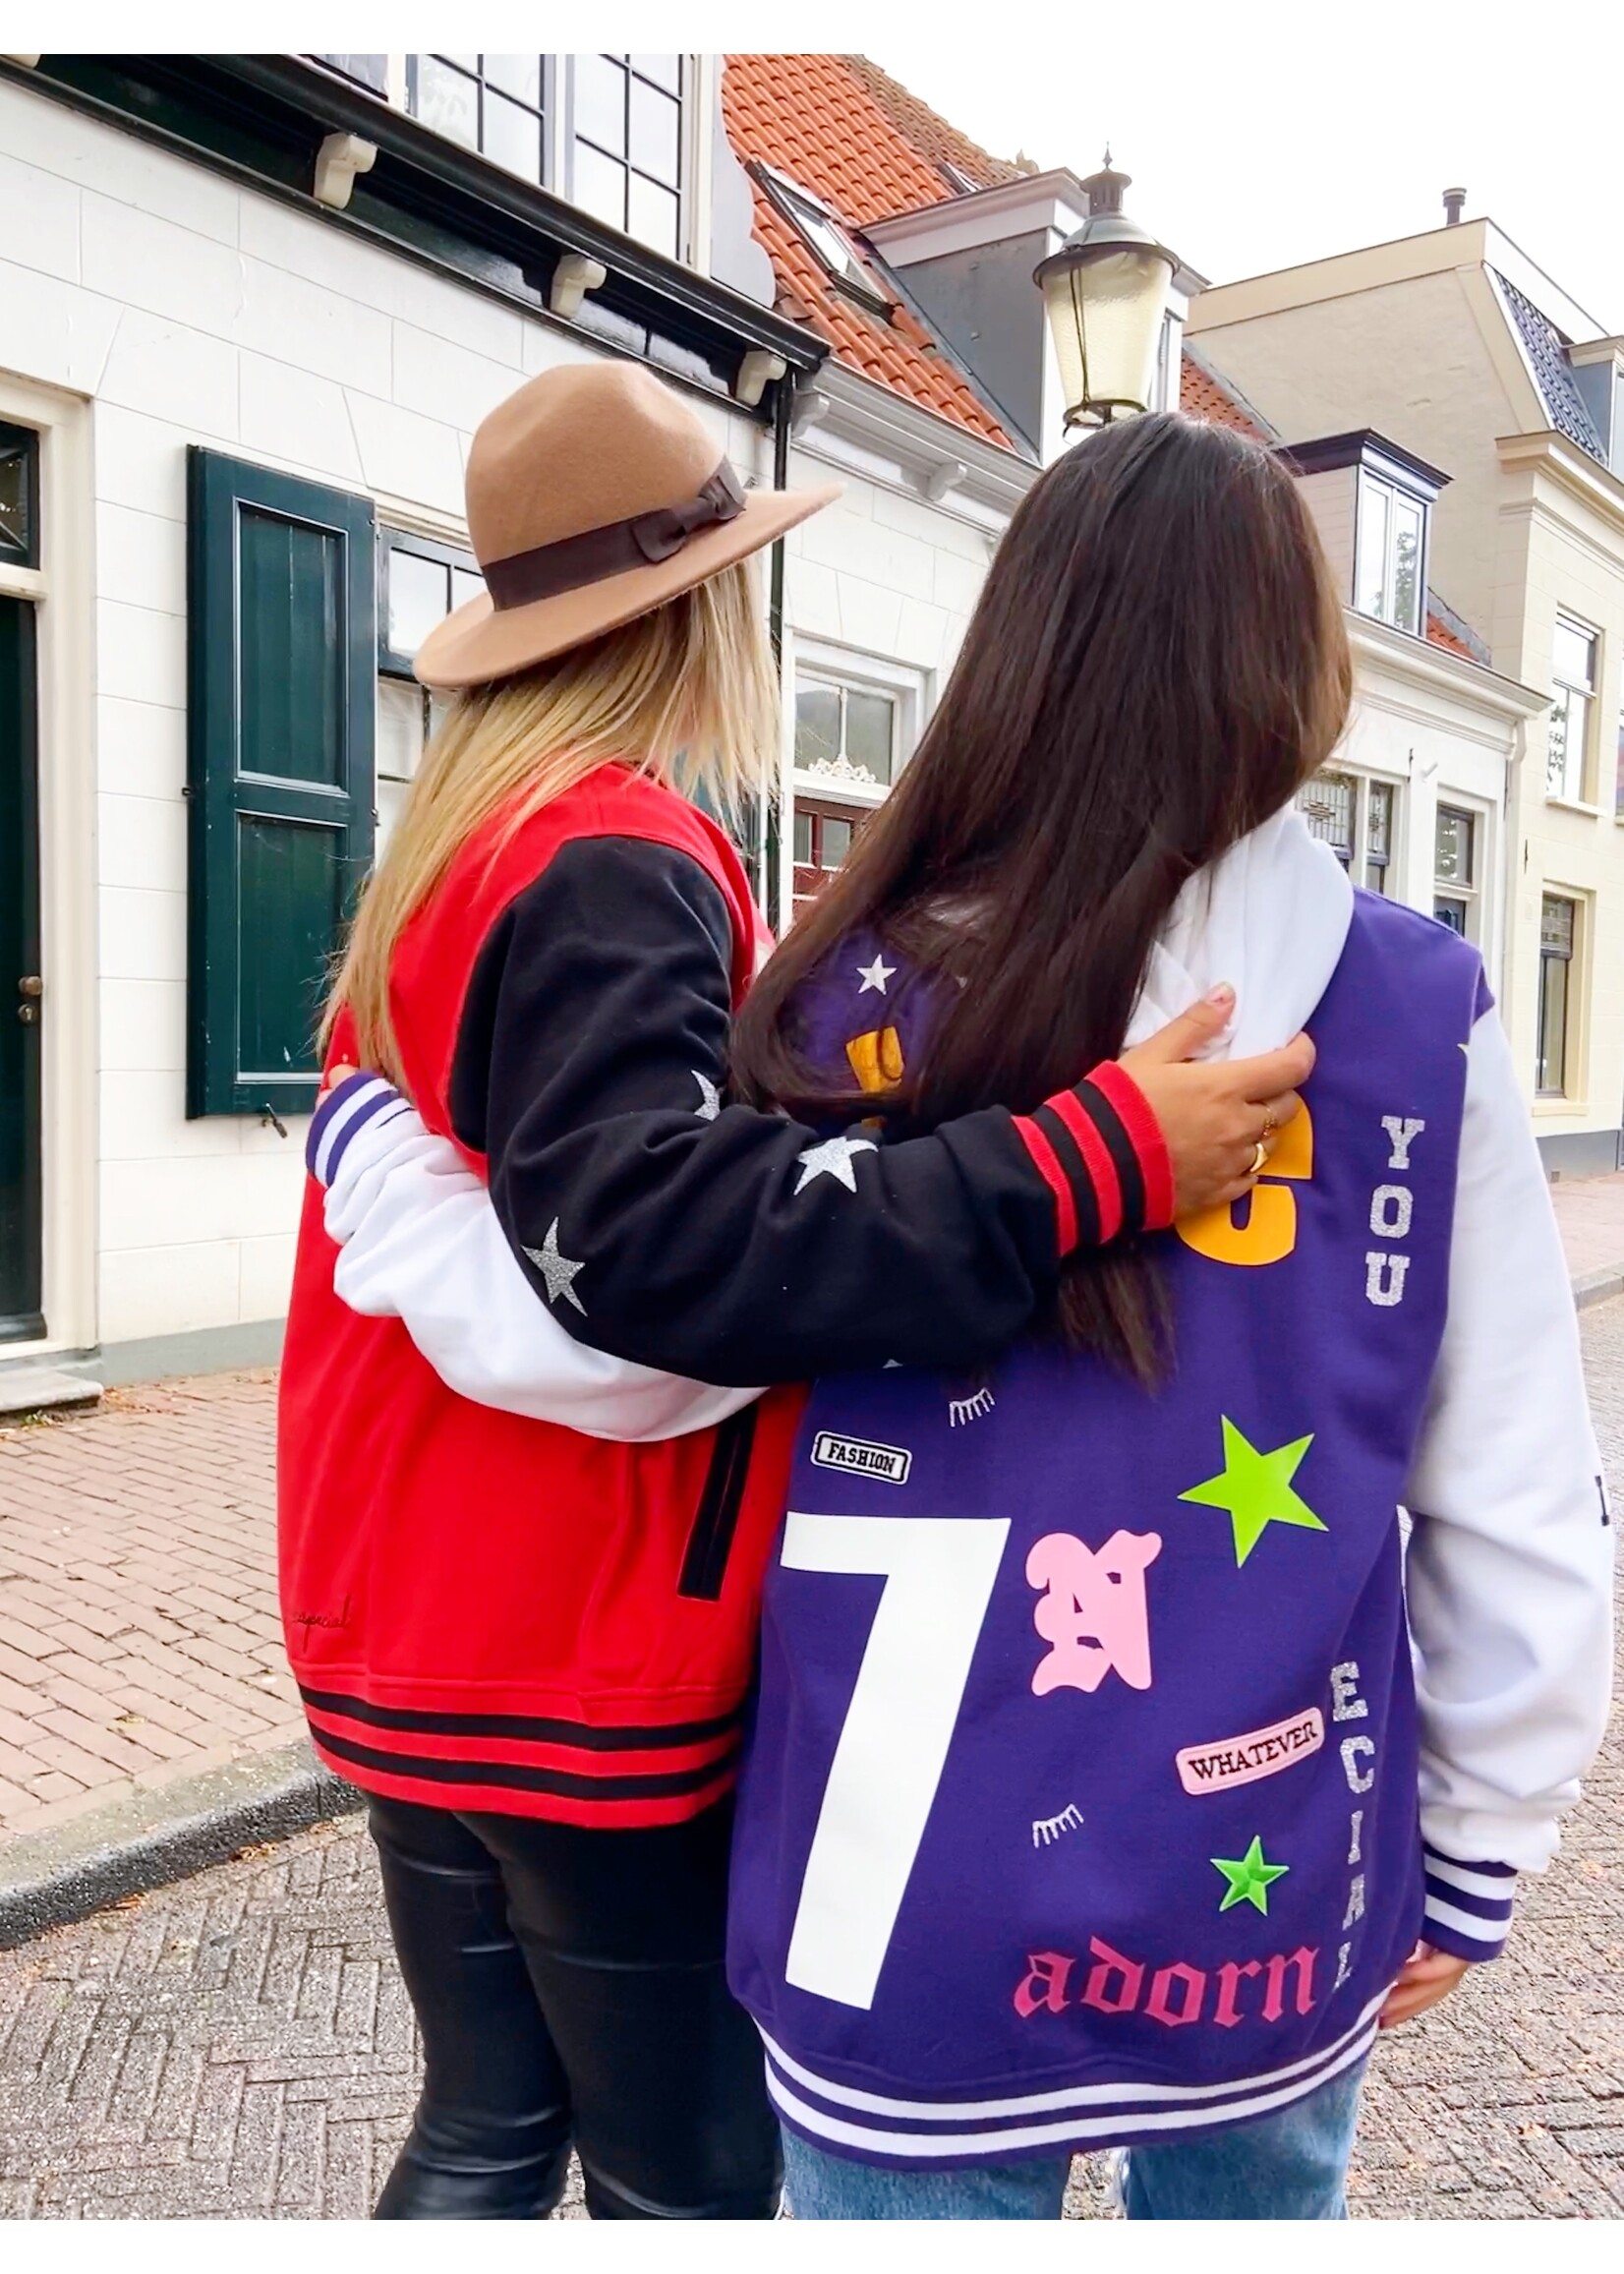 YOU ARE SPECIAL ''SPECIAL LOVE'' Purple Baseball Jacket (one of a kind)